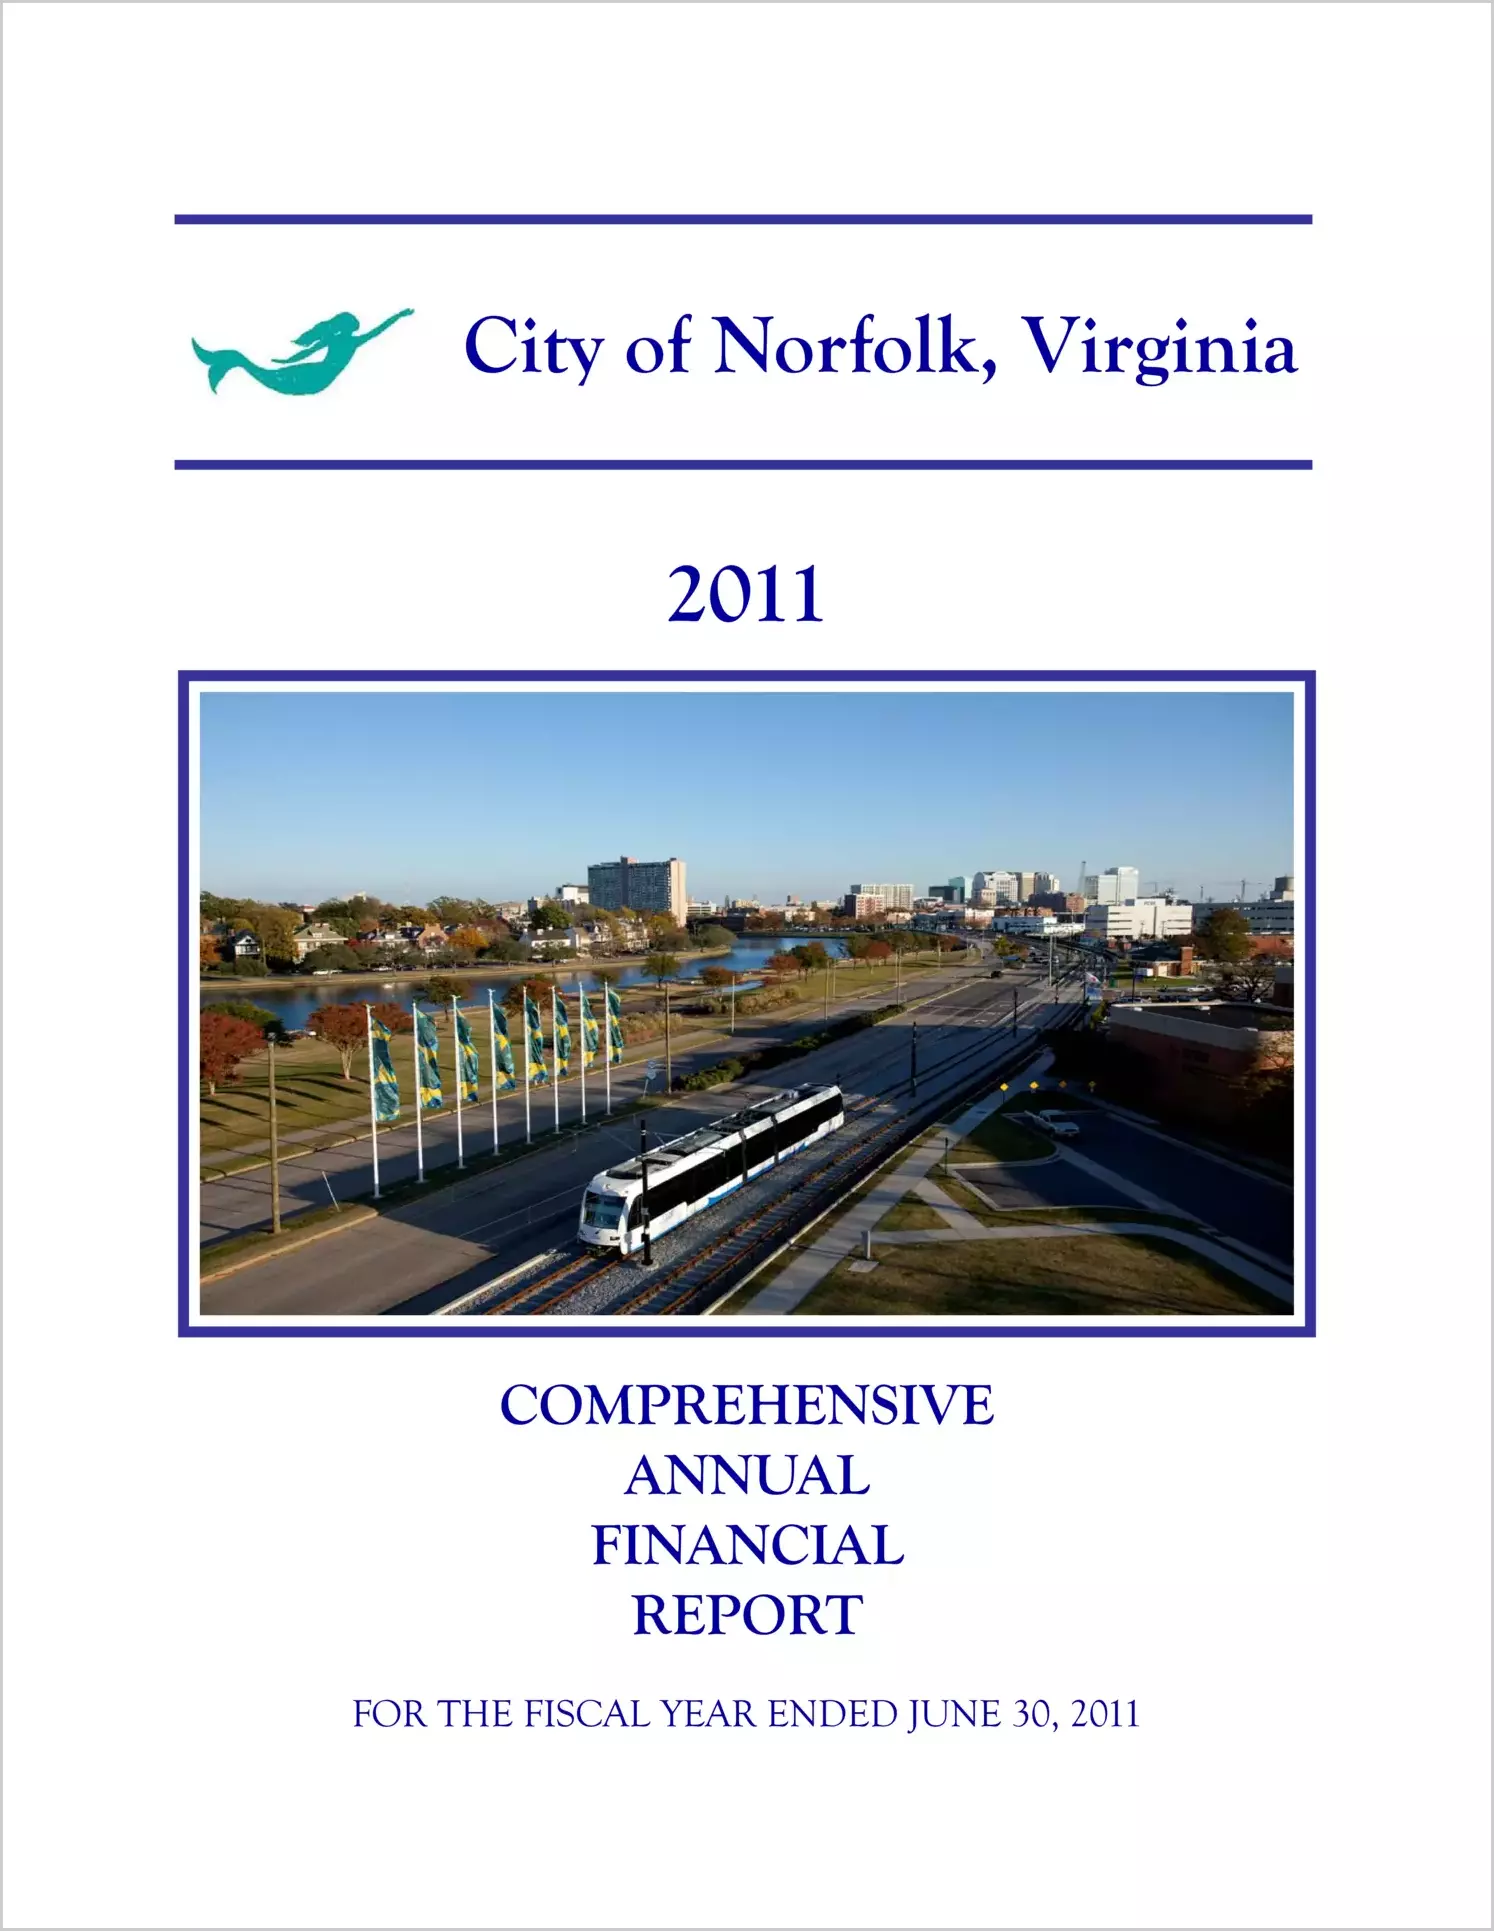 2011 Annual Financial Report for City of Norfolk